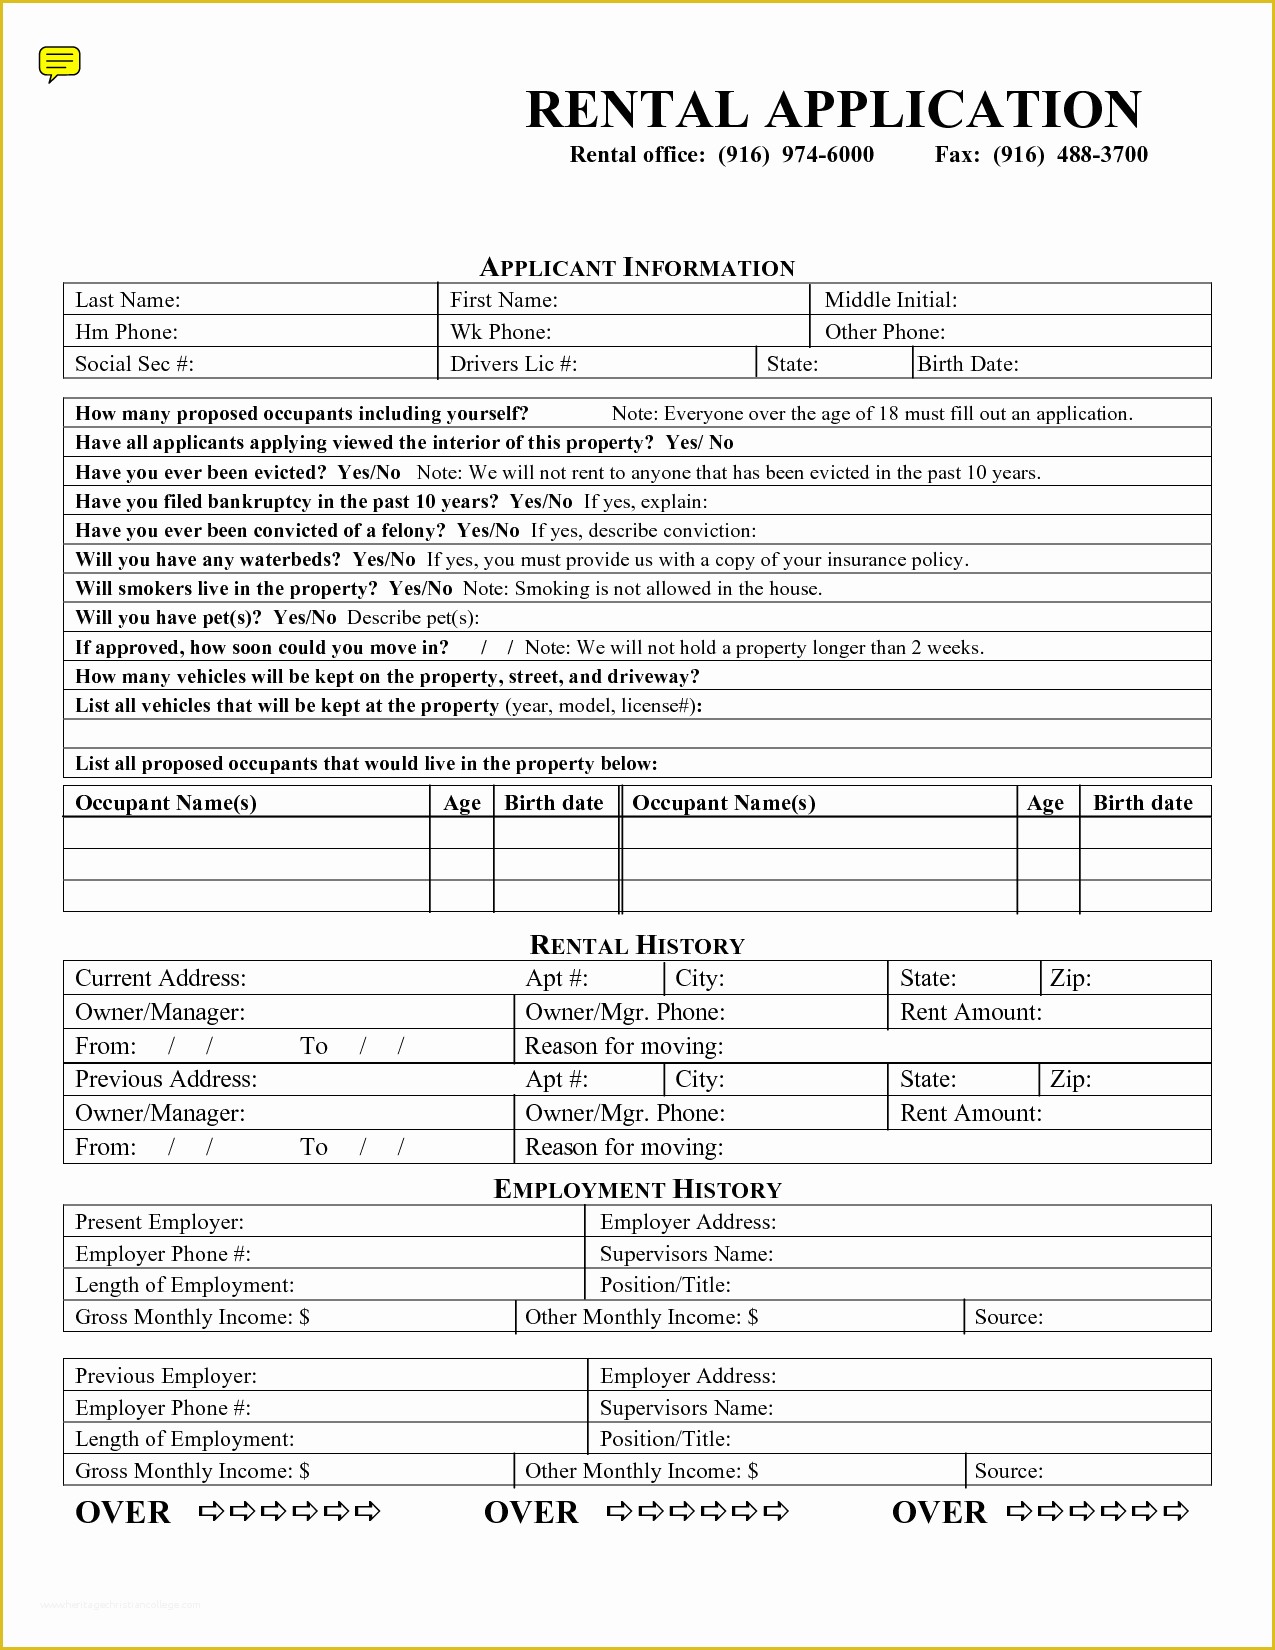 Free Rental Application Template Of Free Rental Application form by Mary Jmenintigar House